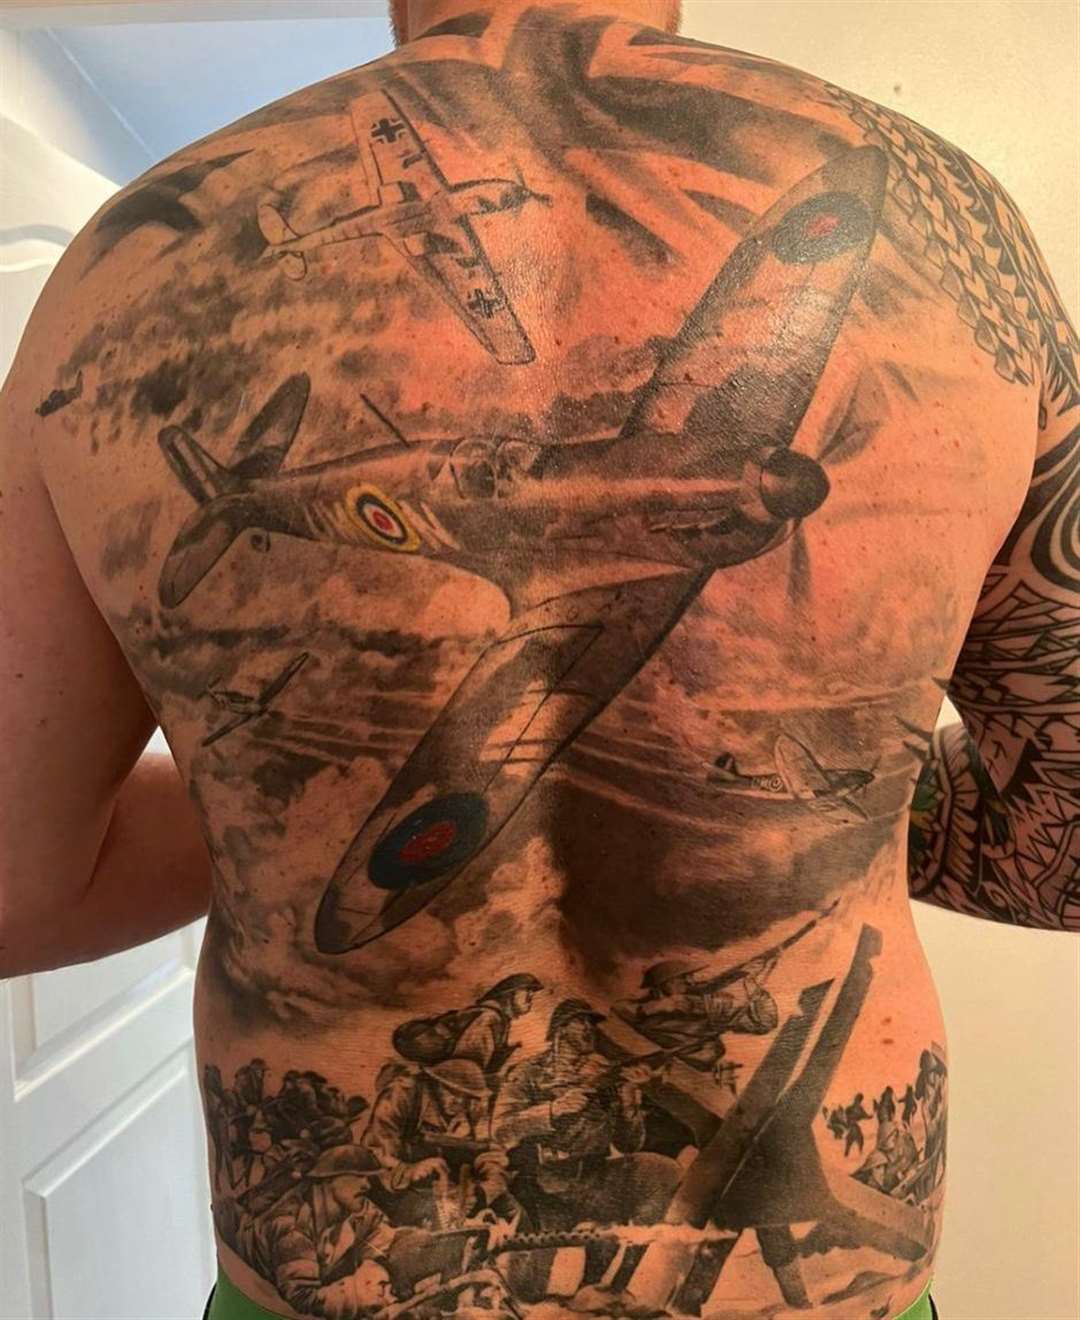 The finished back piece. Picture: Lee Terry